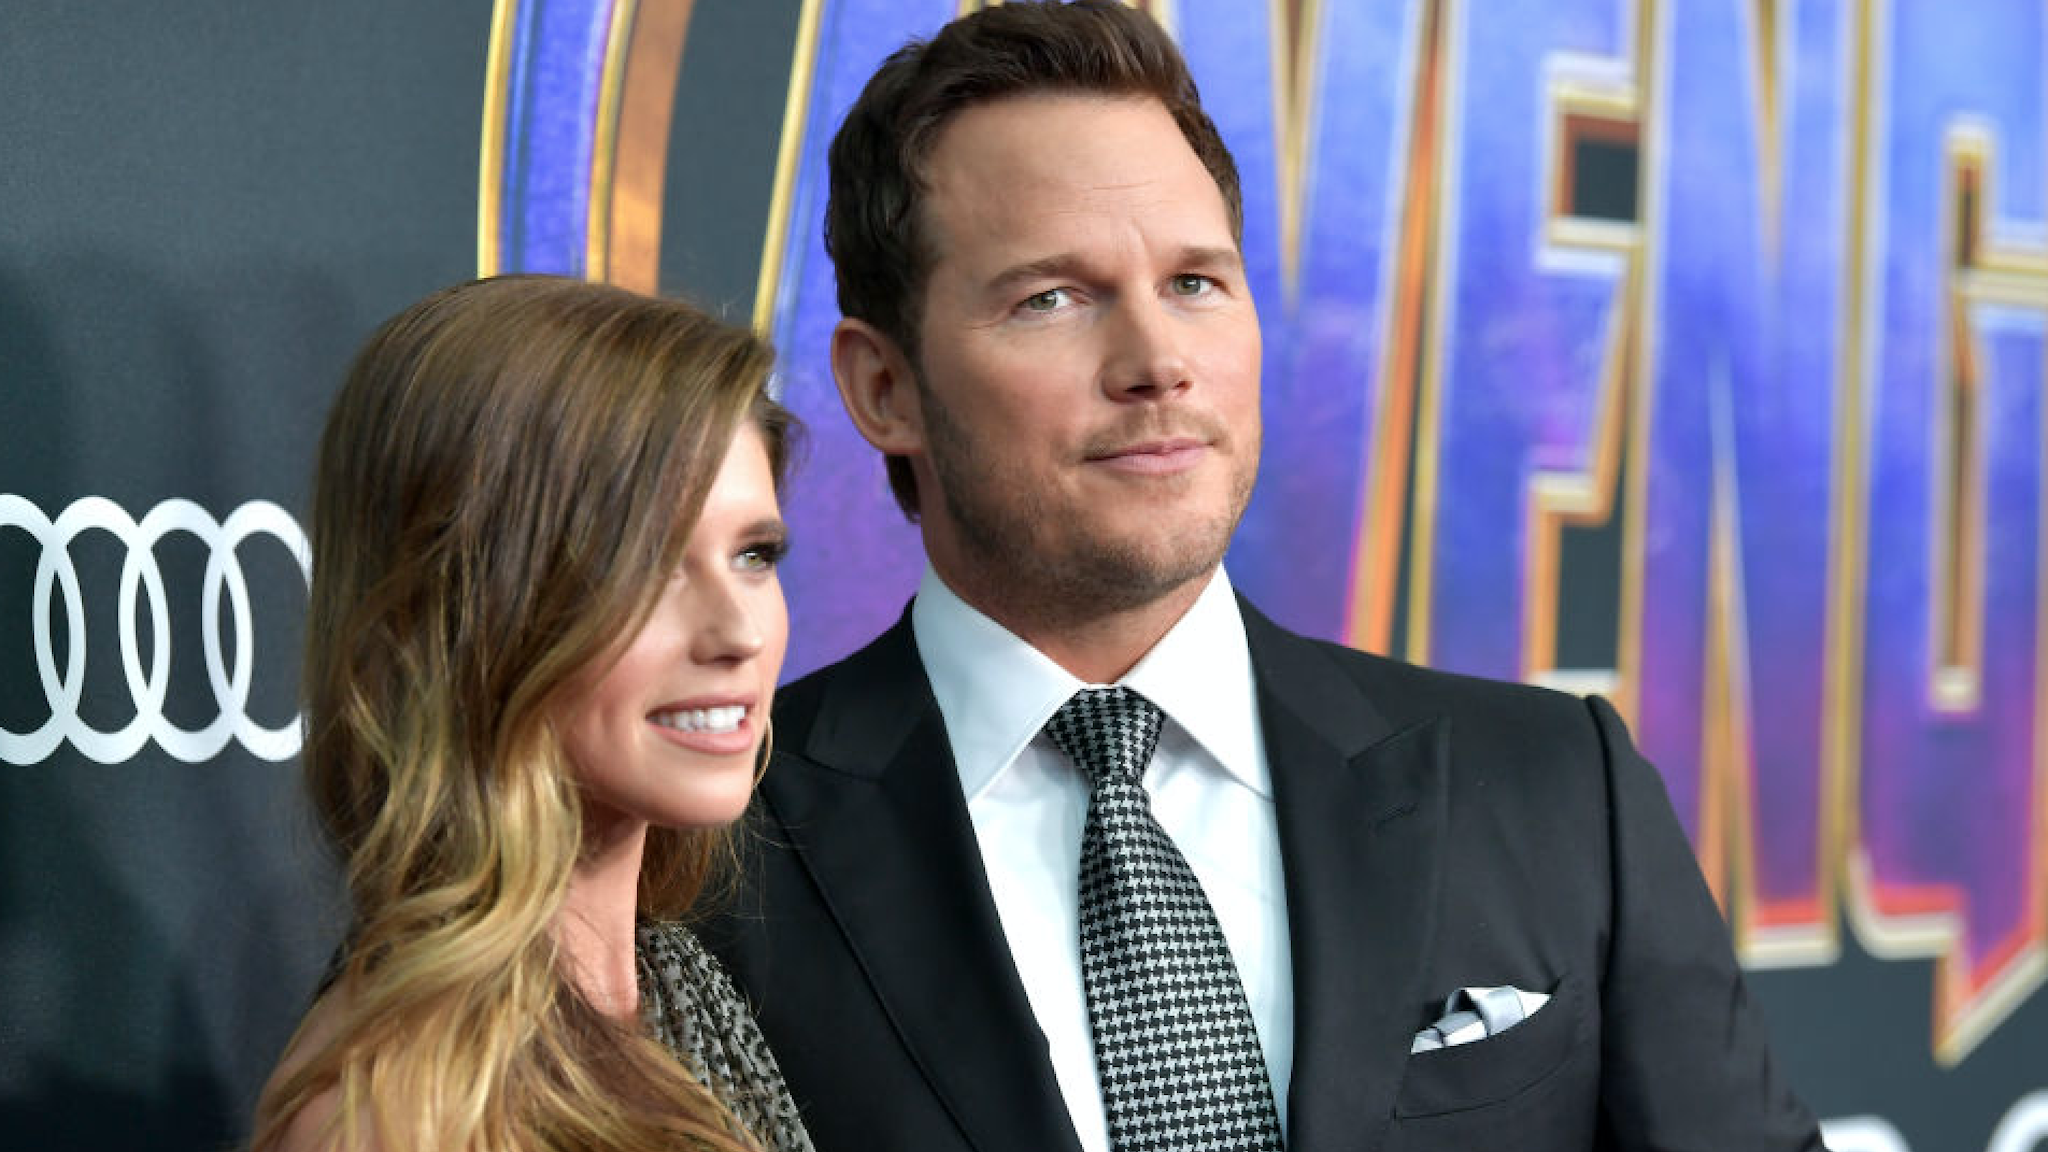 Katherine Schwarzenegger and Chris Pratt attend the world premiere of Walt Disney Studios Motion Pictures "Avengers: Endgame" at the Los Angeles Convention Center on April 22, 2019 in Los Angeles, California.